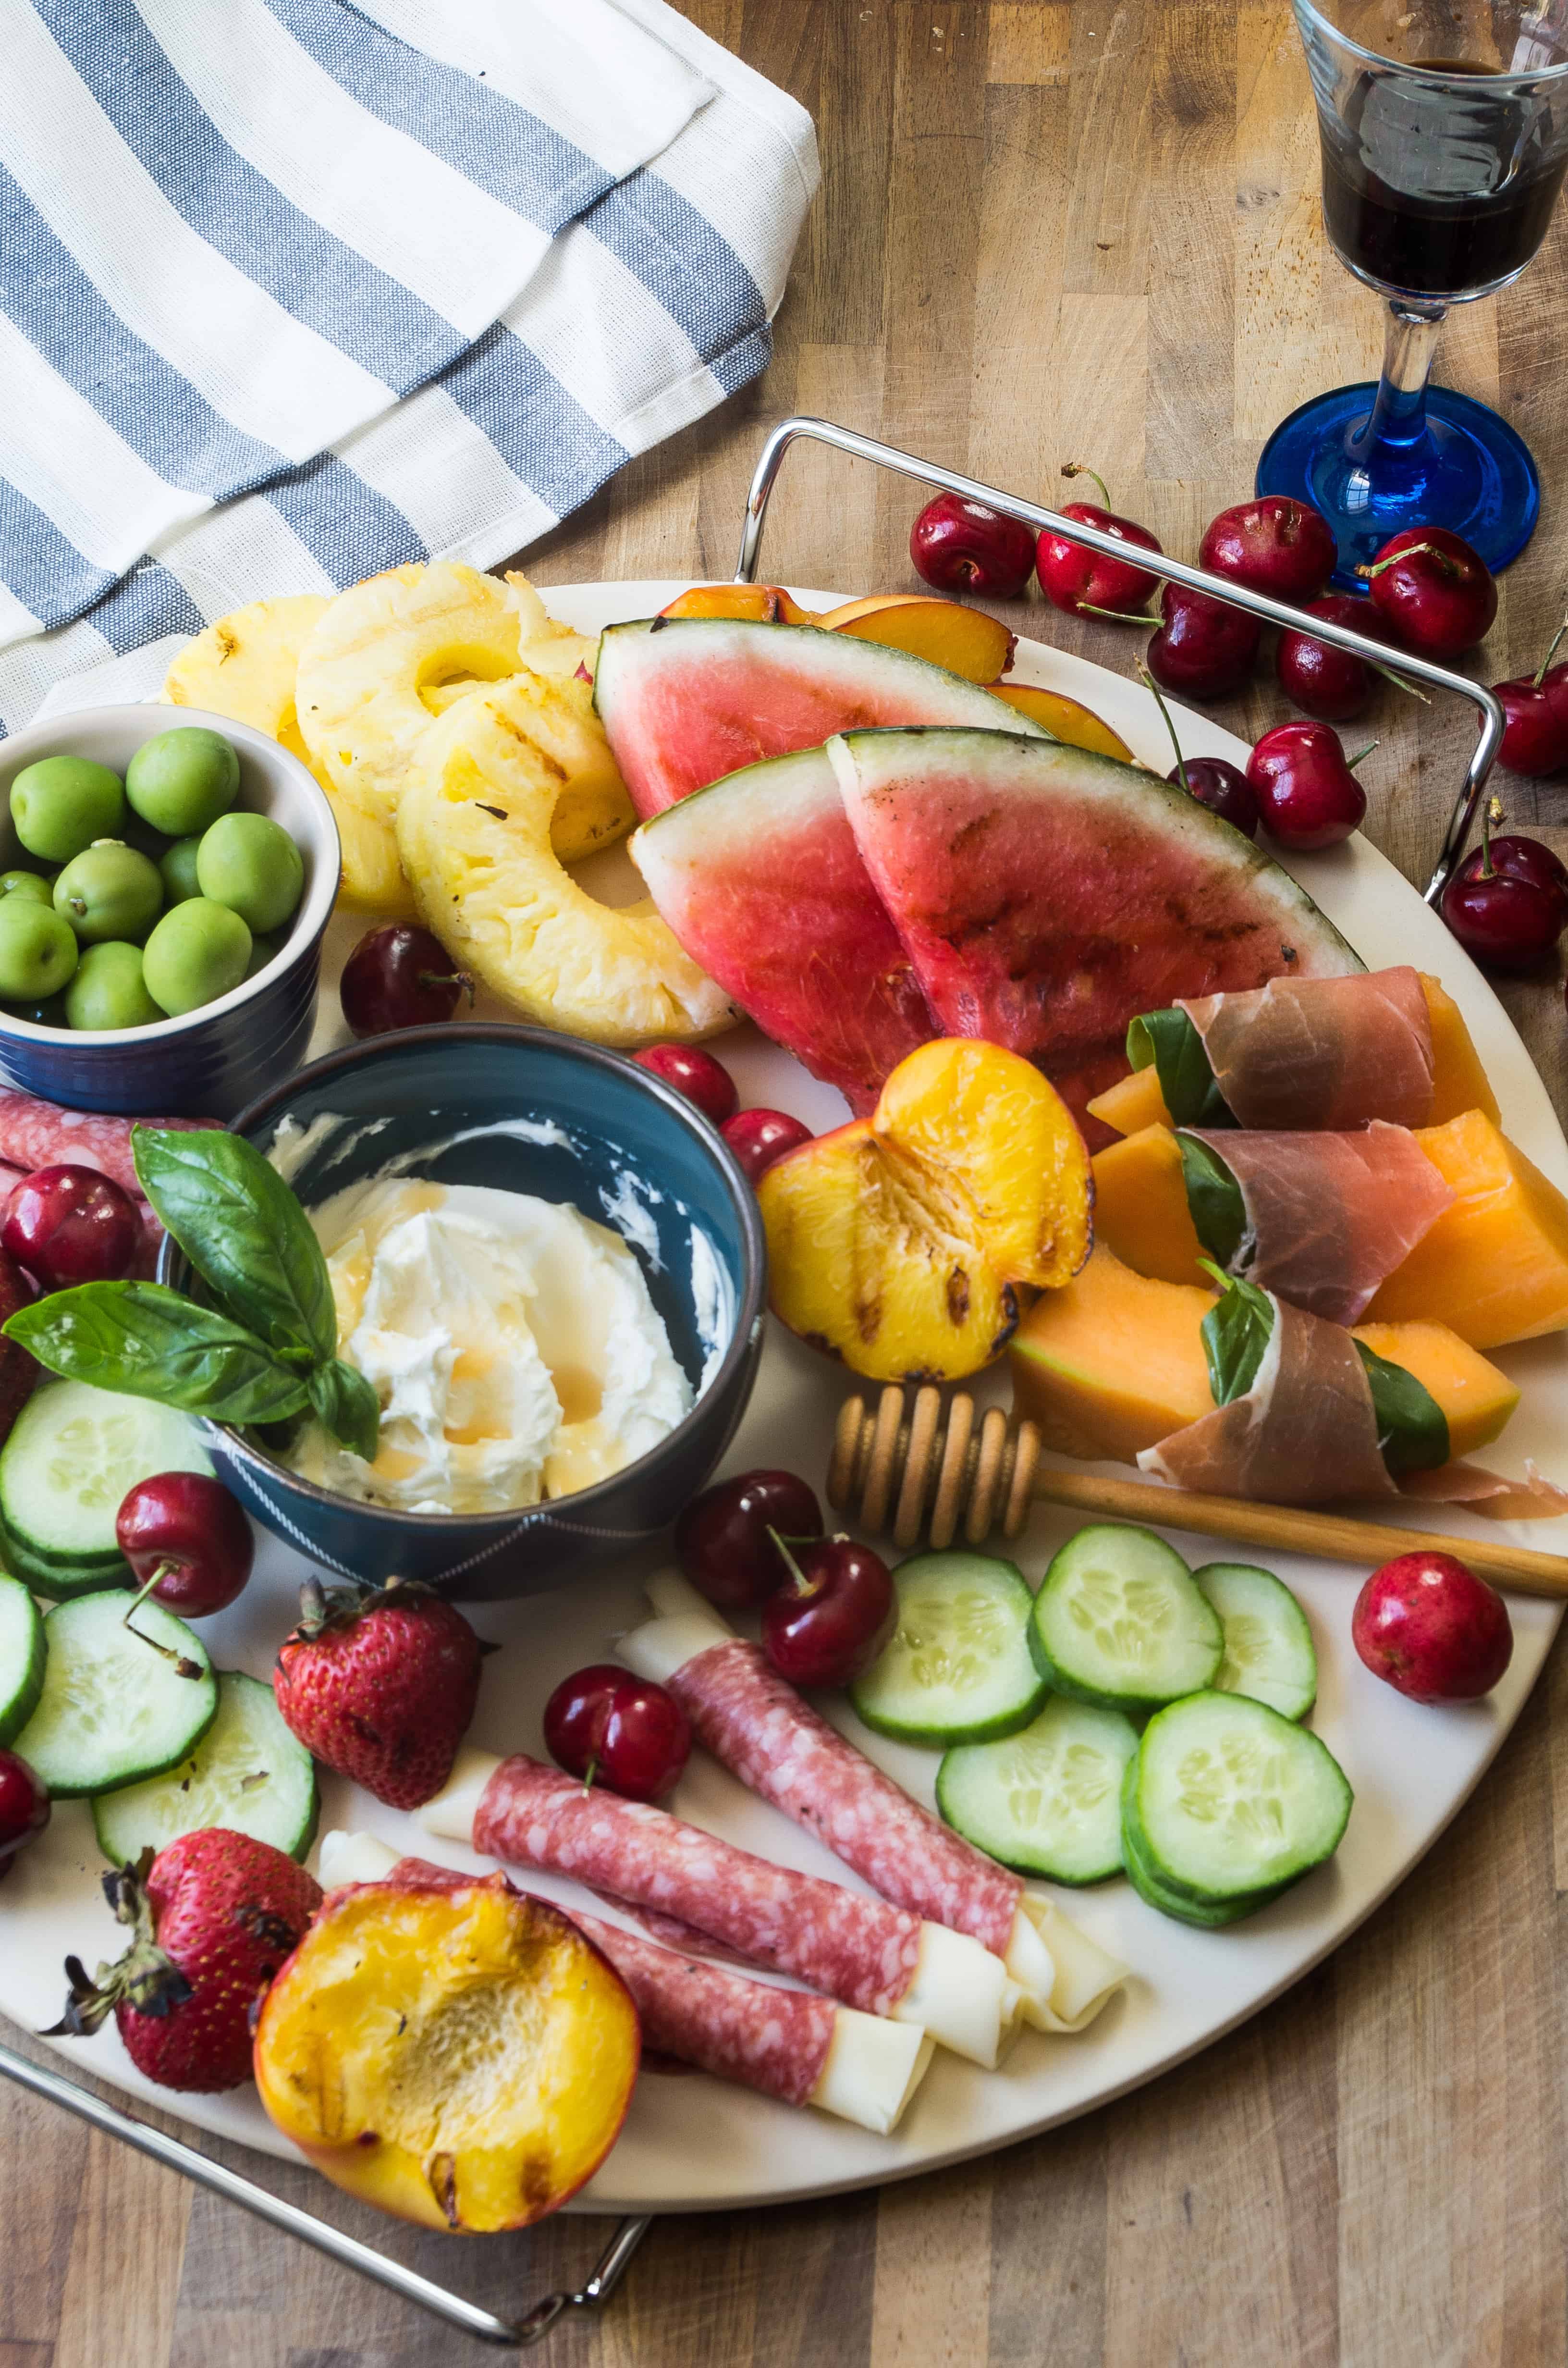 Grilled Fruit Summer Cheese Board- summer's simplest grilled fruit cheese board appetizer perfect 4th of July recipe!|thekitcheneer.com